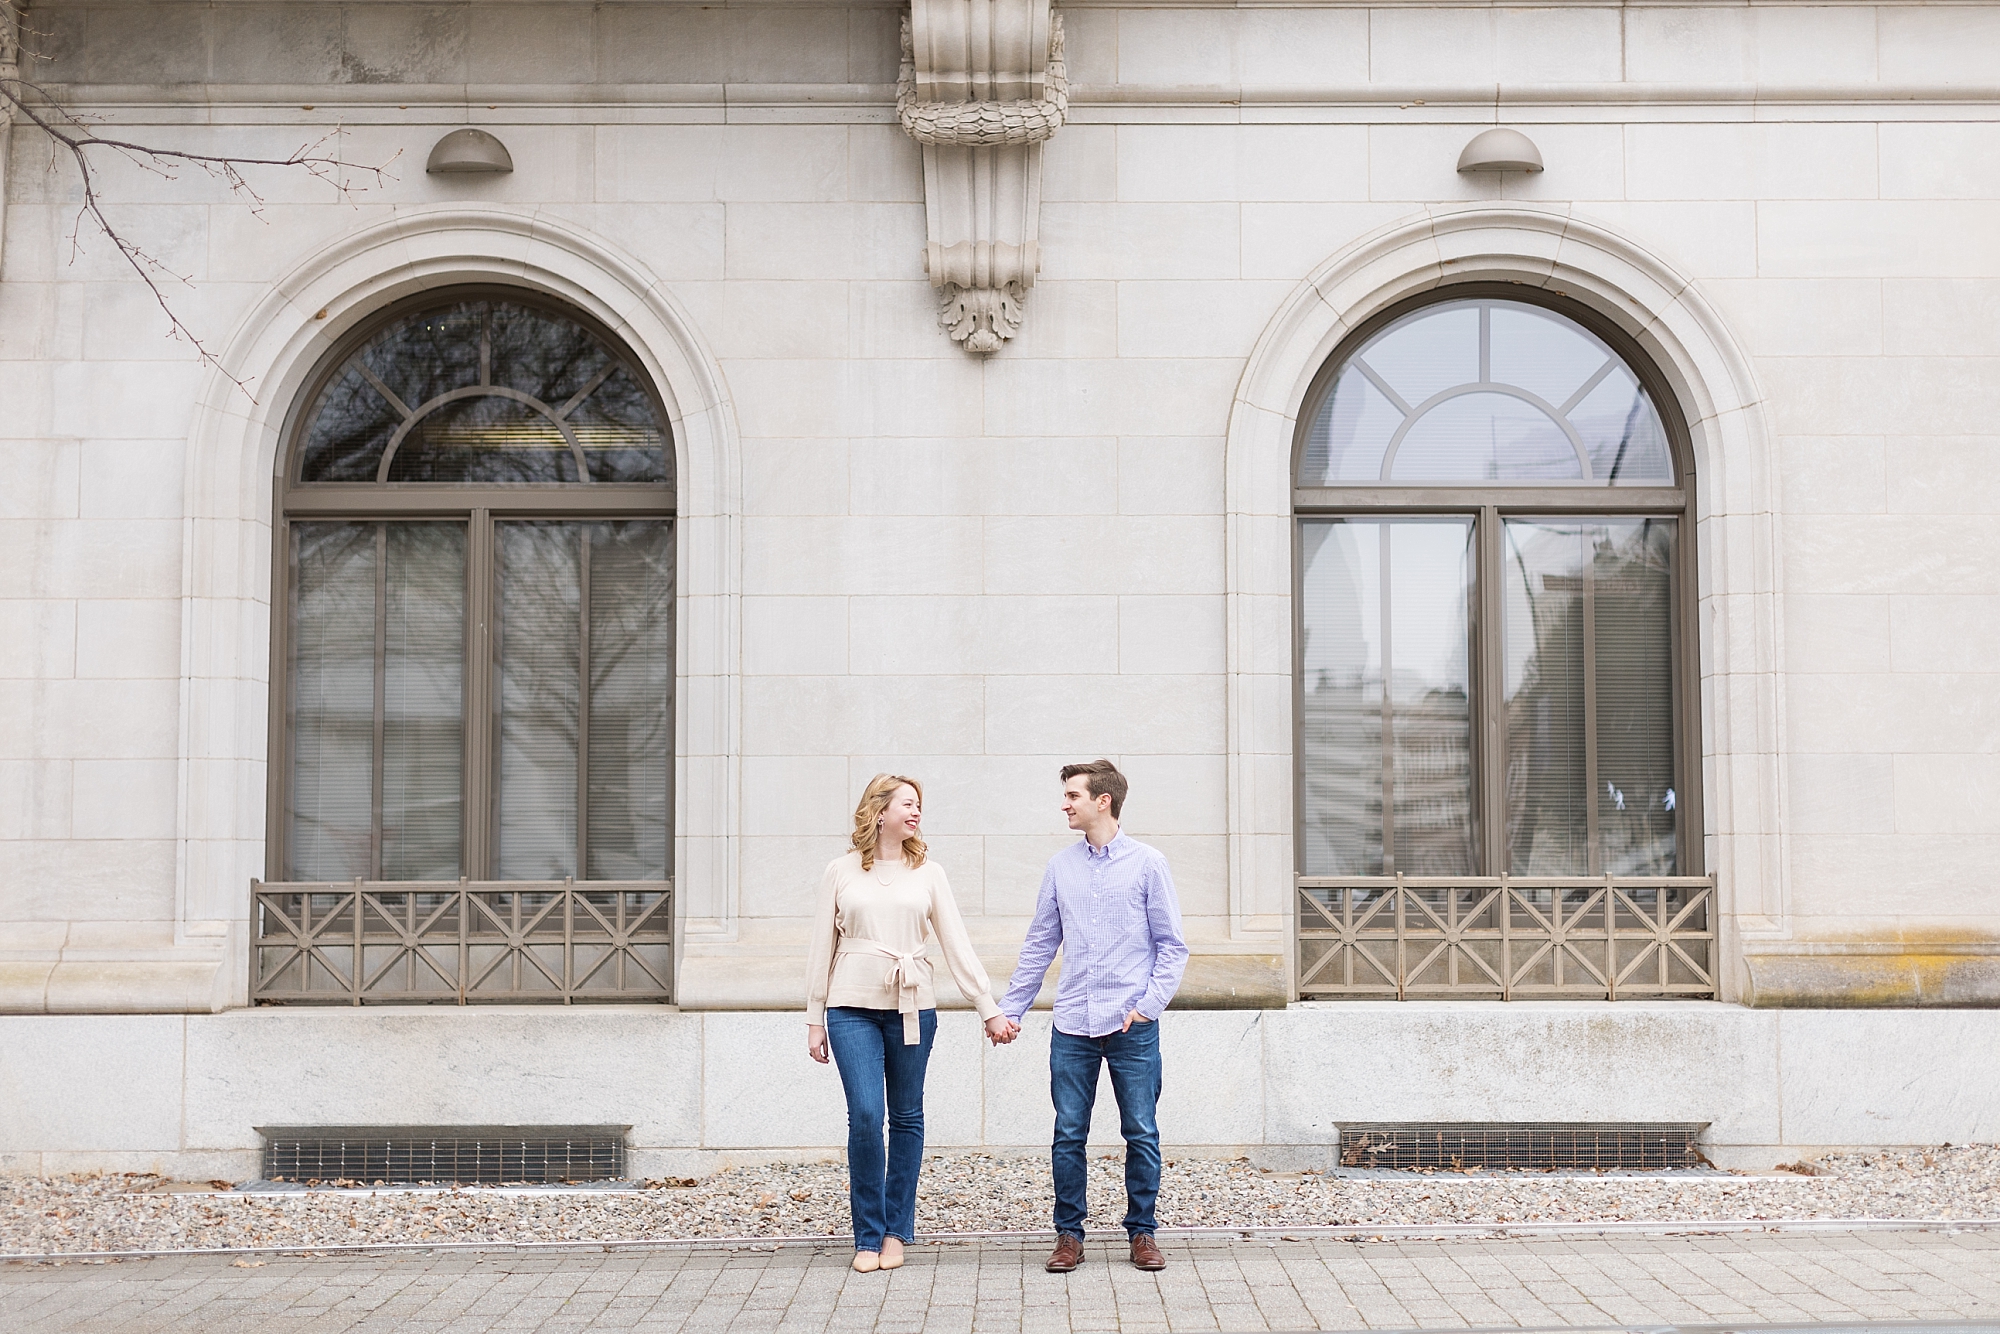 Downtown Raleigh Winter Engagement photos | Sarah Hinckley Photography | Raleigh Engagement Photographer